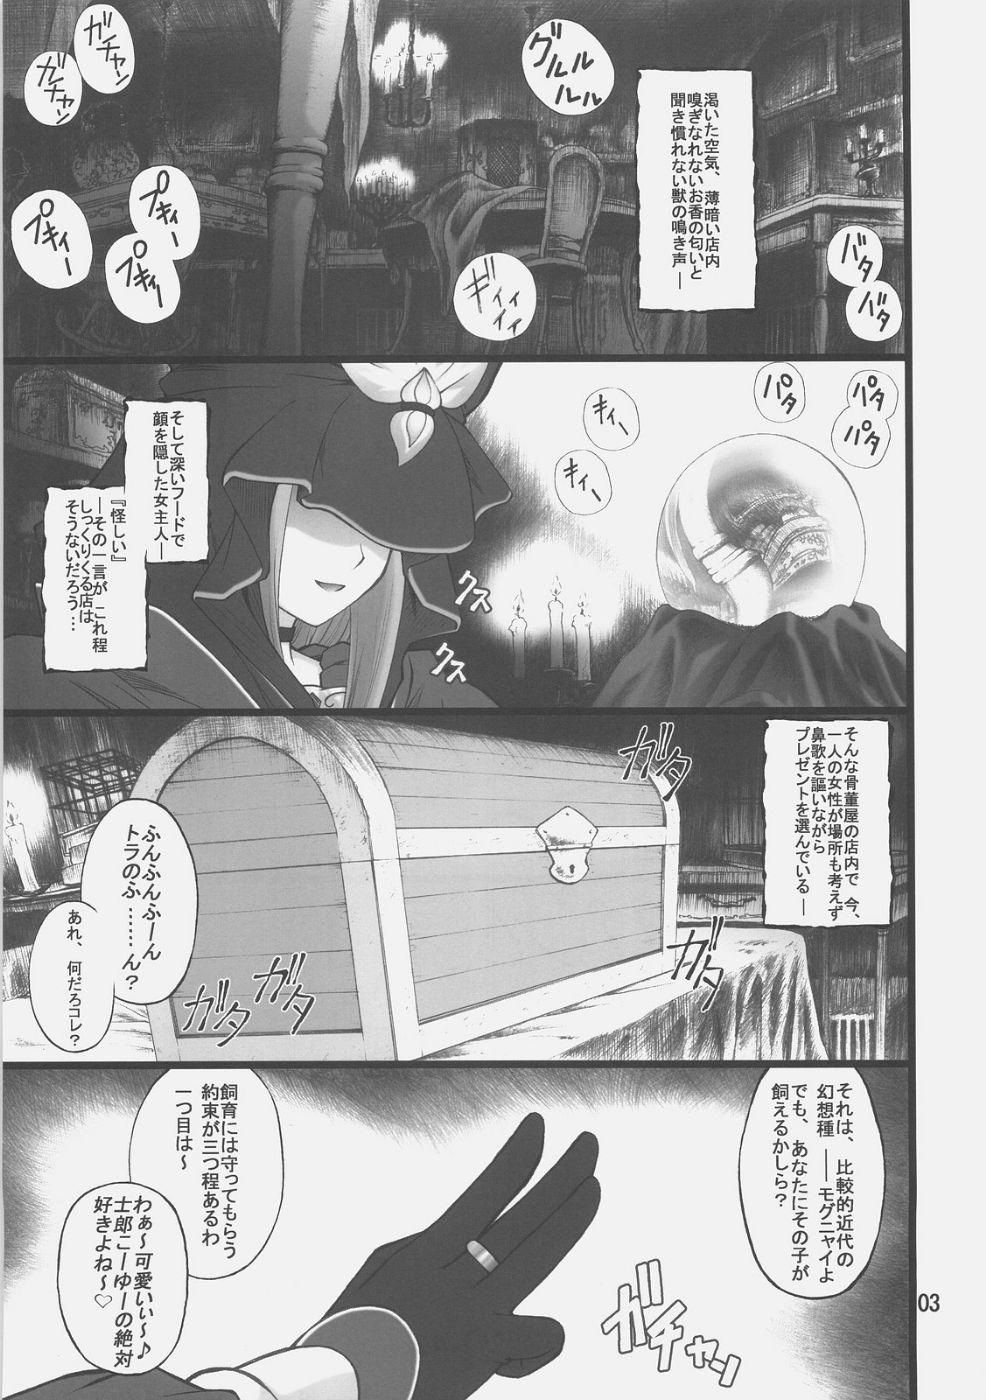 Step Fantasy Grem-Rin 1 - Fate stay night Fitness - Page 2